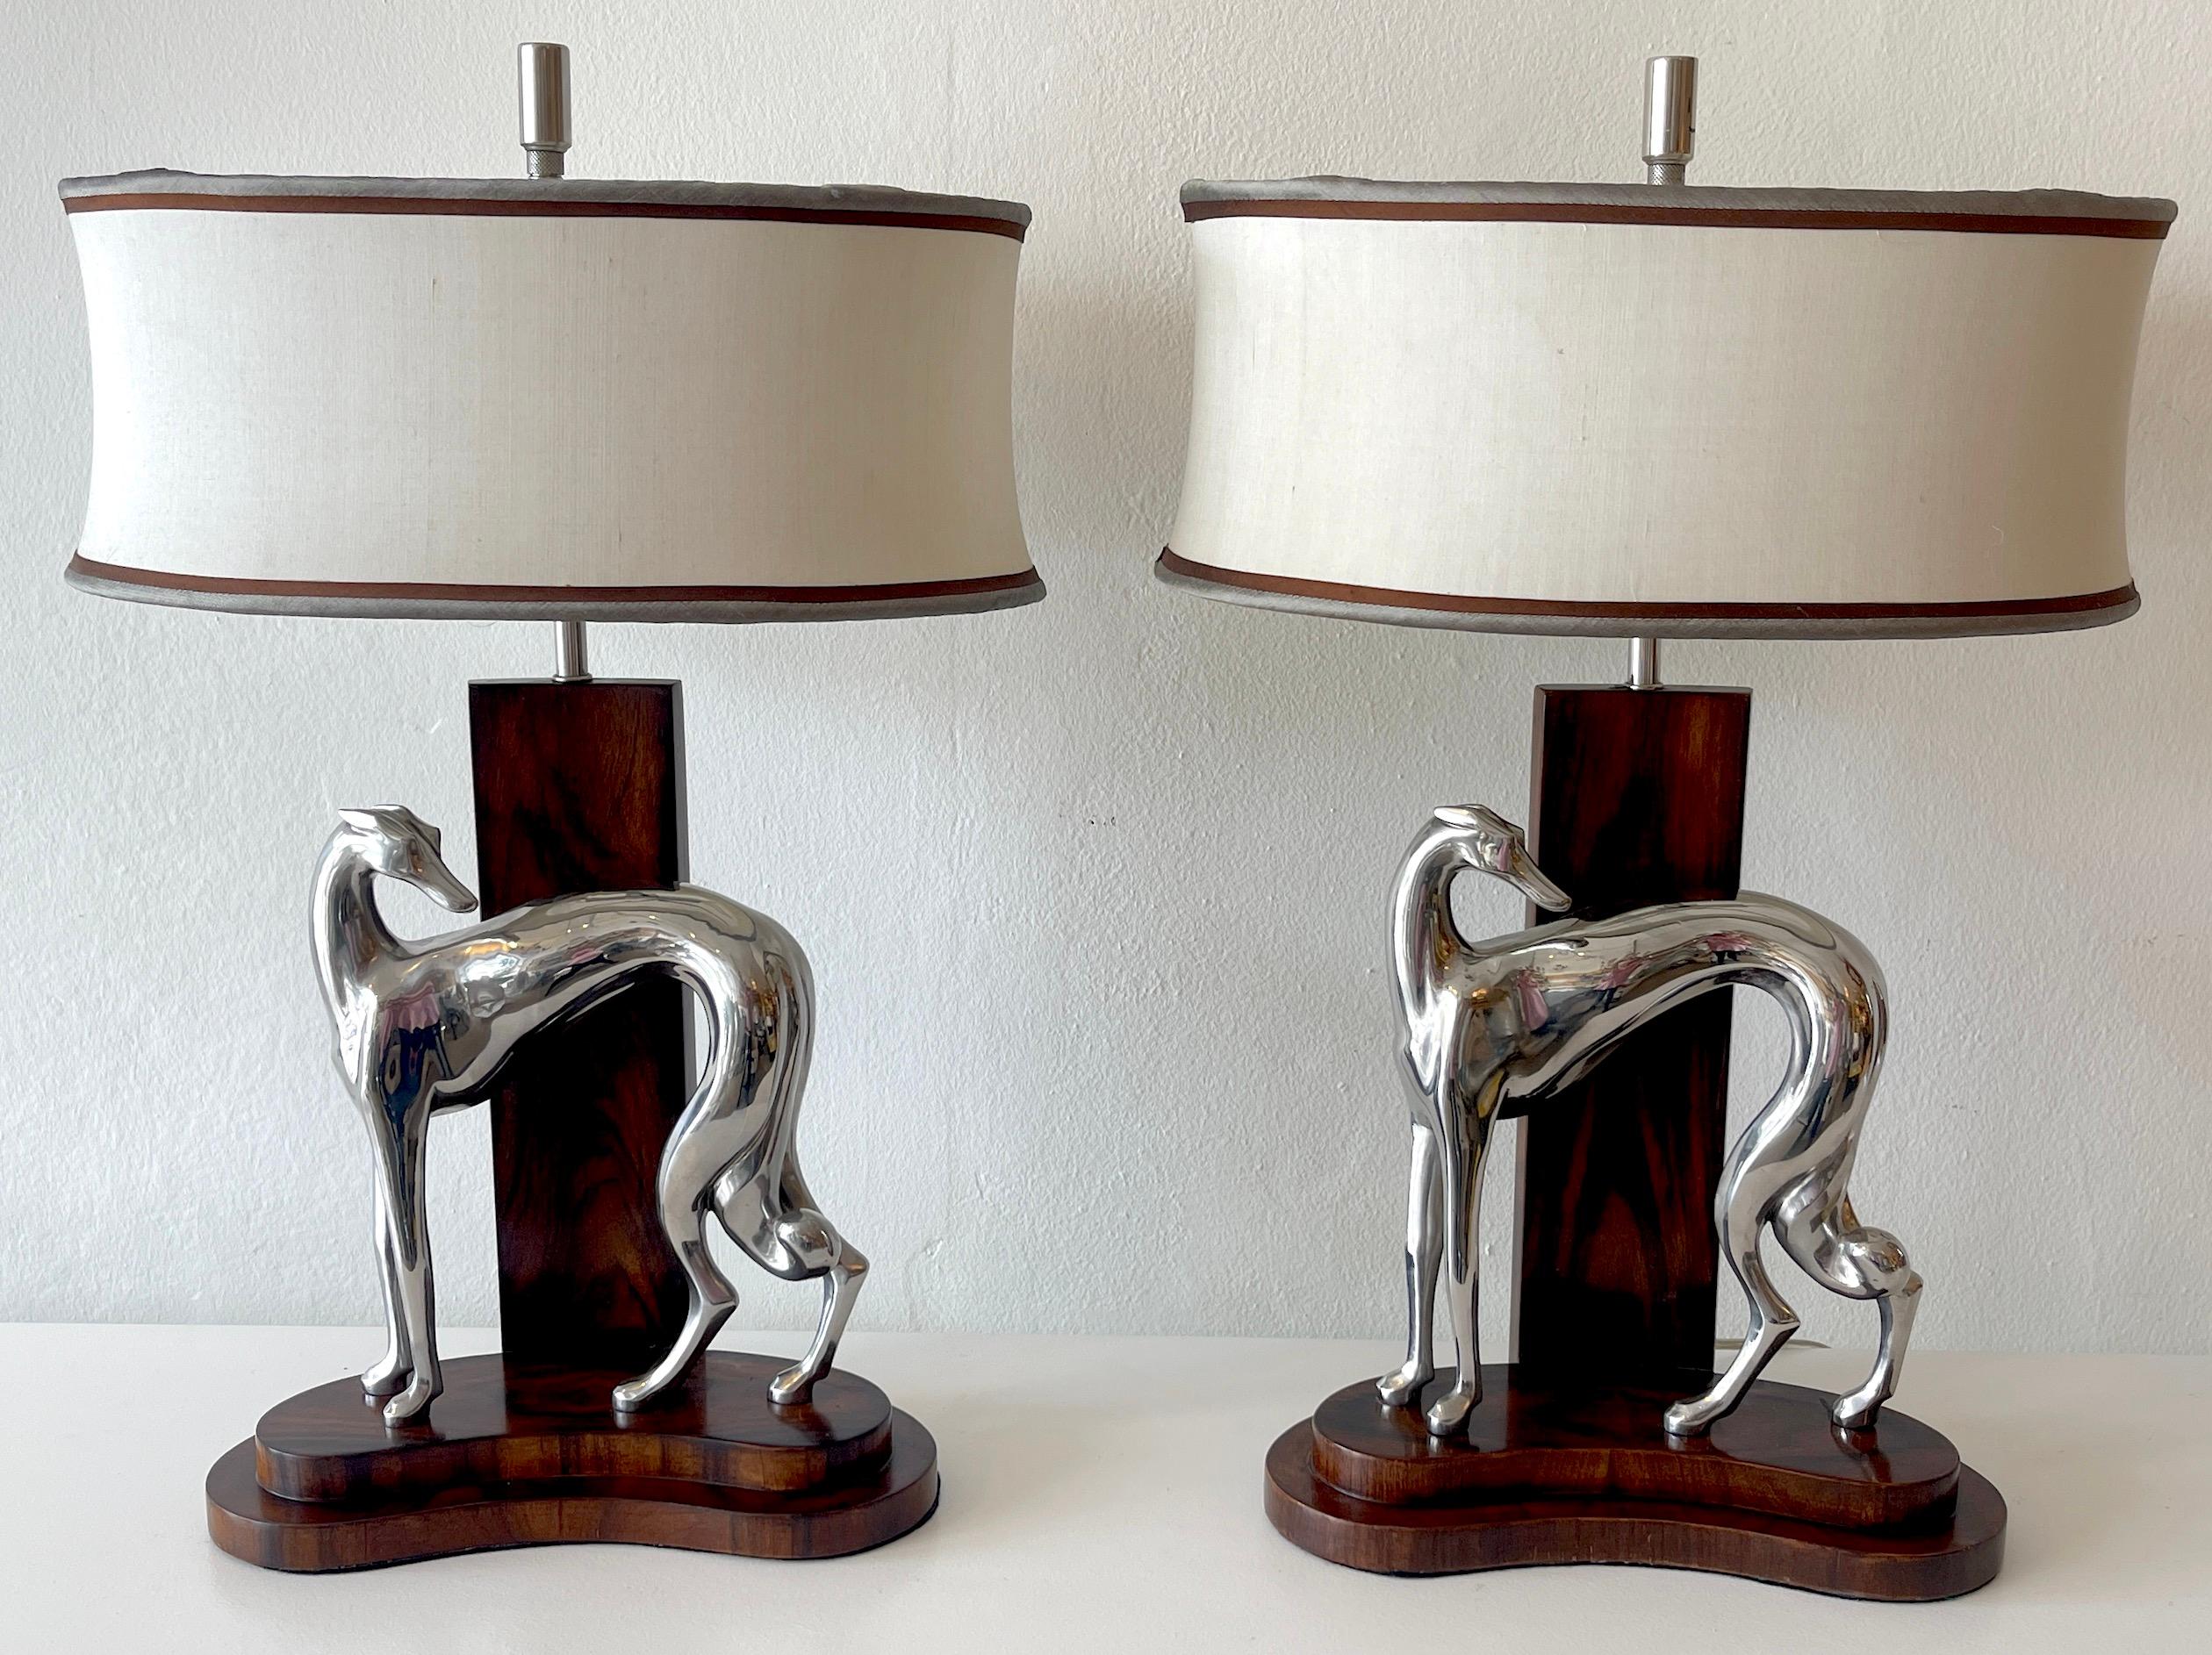 Pair of Art Deco style silverplated bronze whippet lamps with custom shades, Each one with French polished mahogany bases, A single standing figure of a Whippet, of exceptional quality and casting, the lamps are extremely heavy. Fitted with two